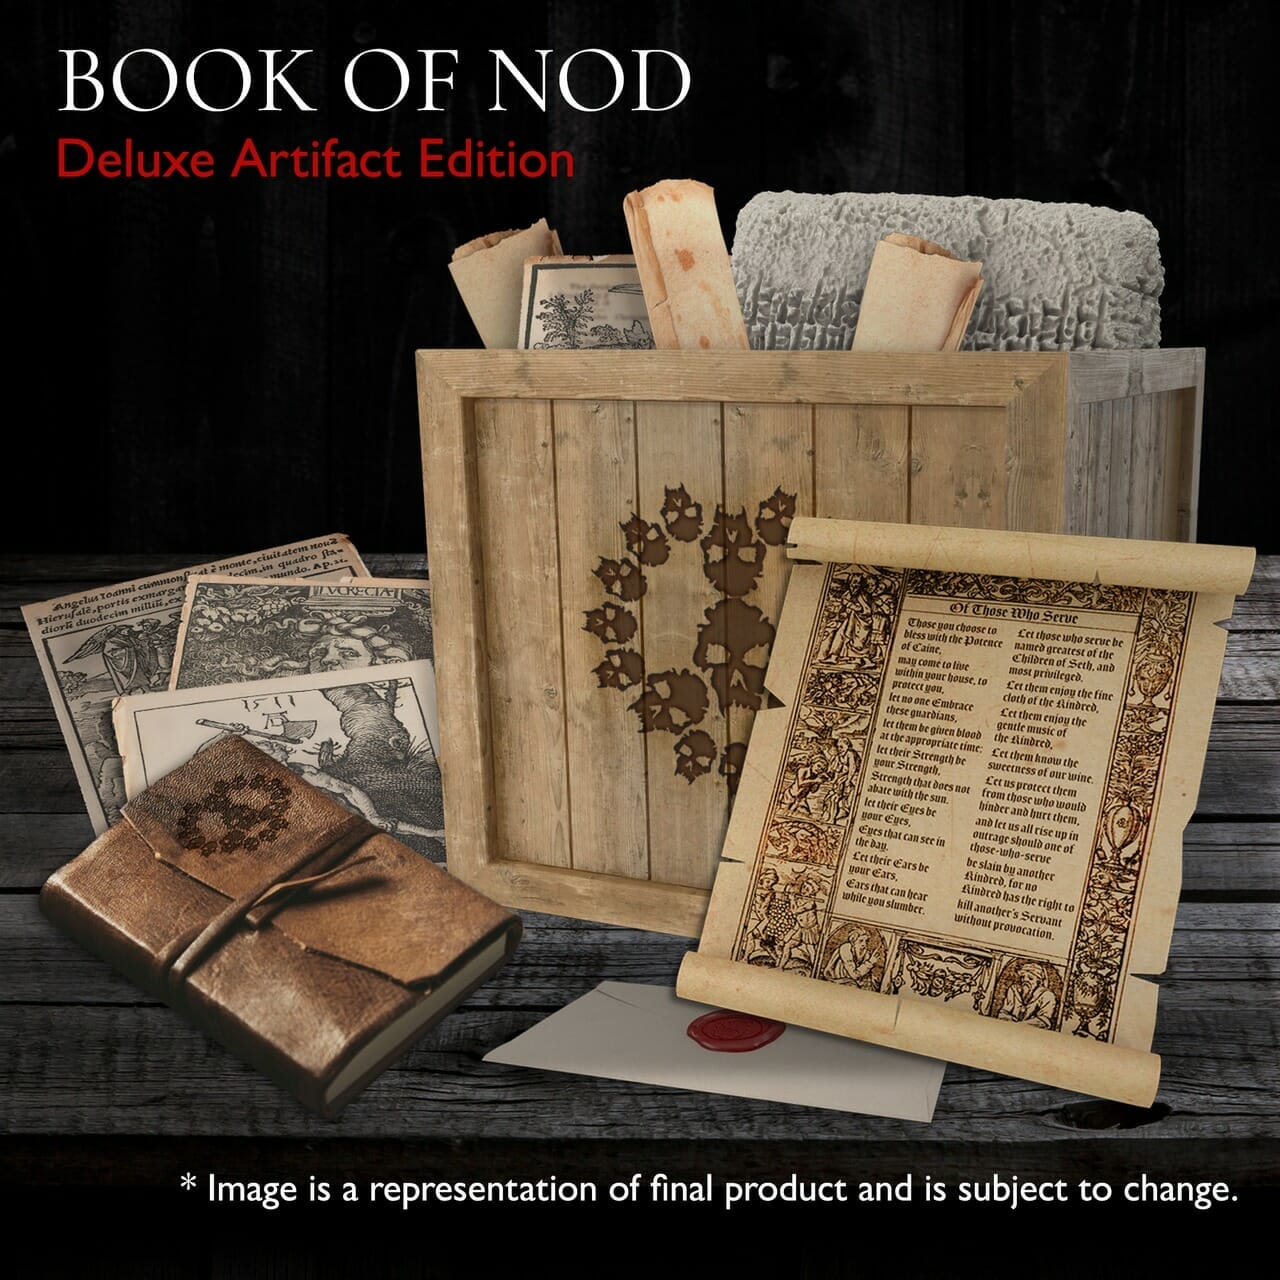 The Book of Nod Deluxe Artifact Edition